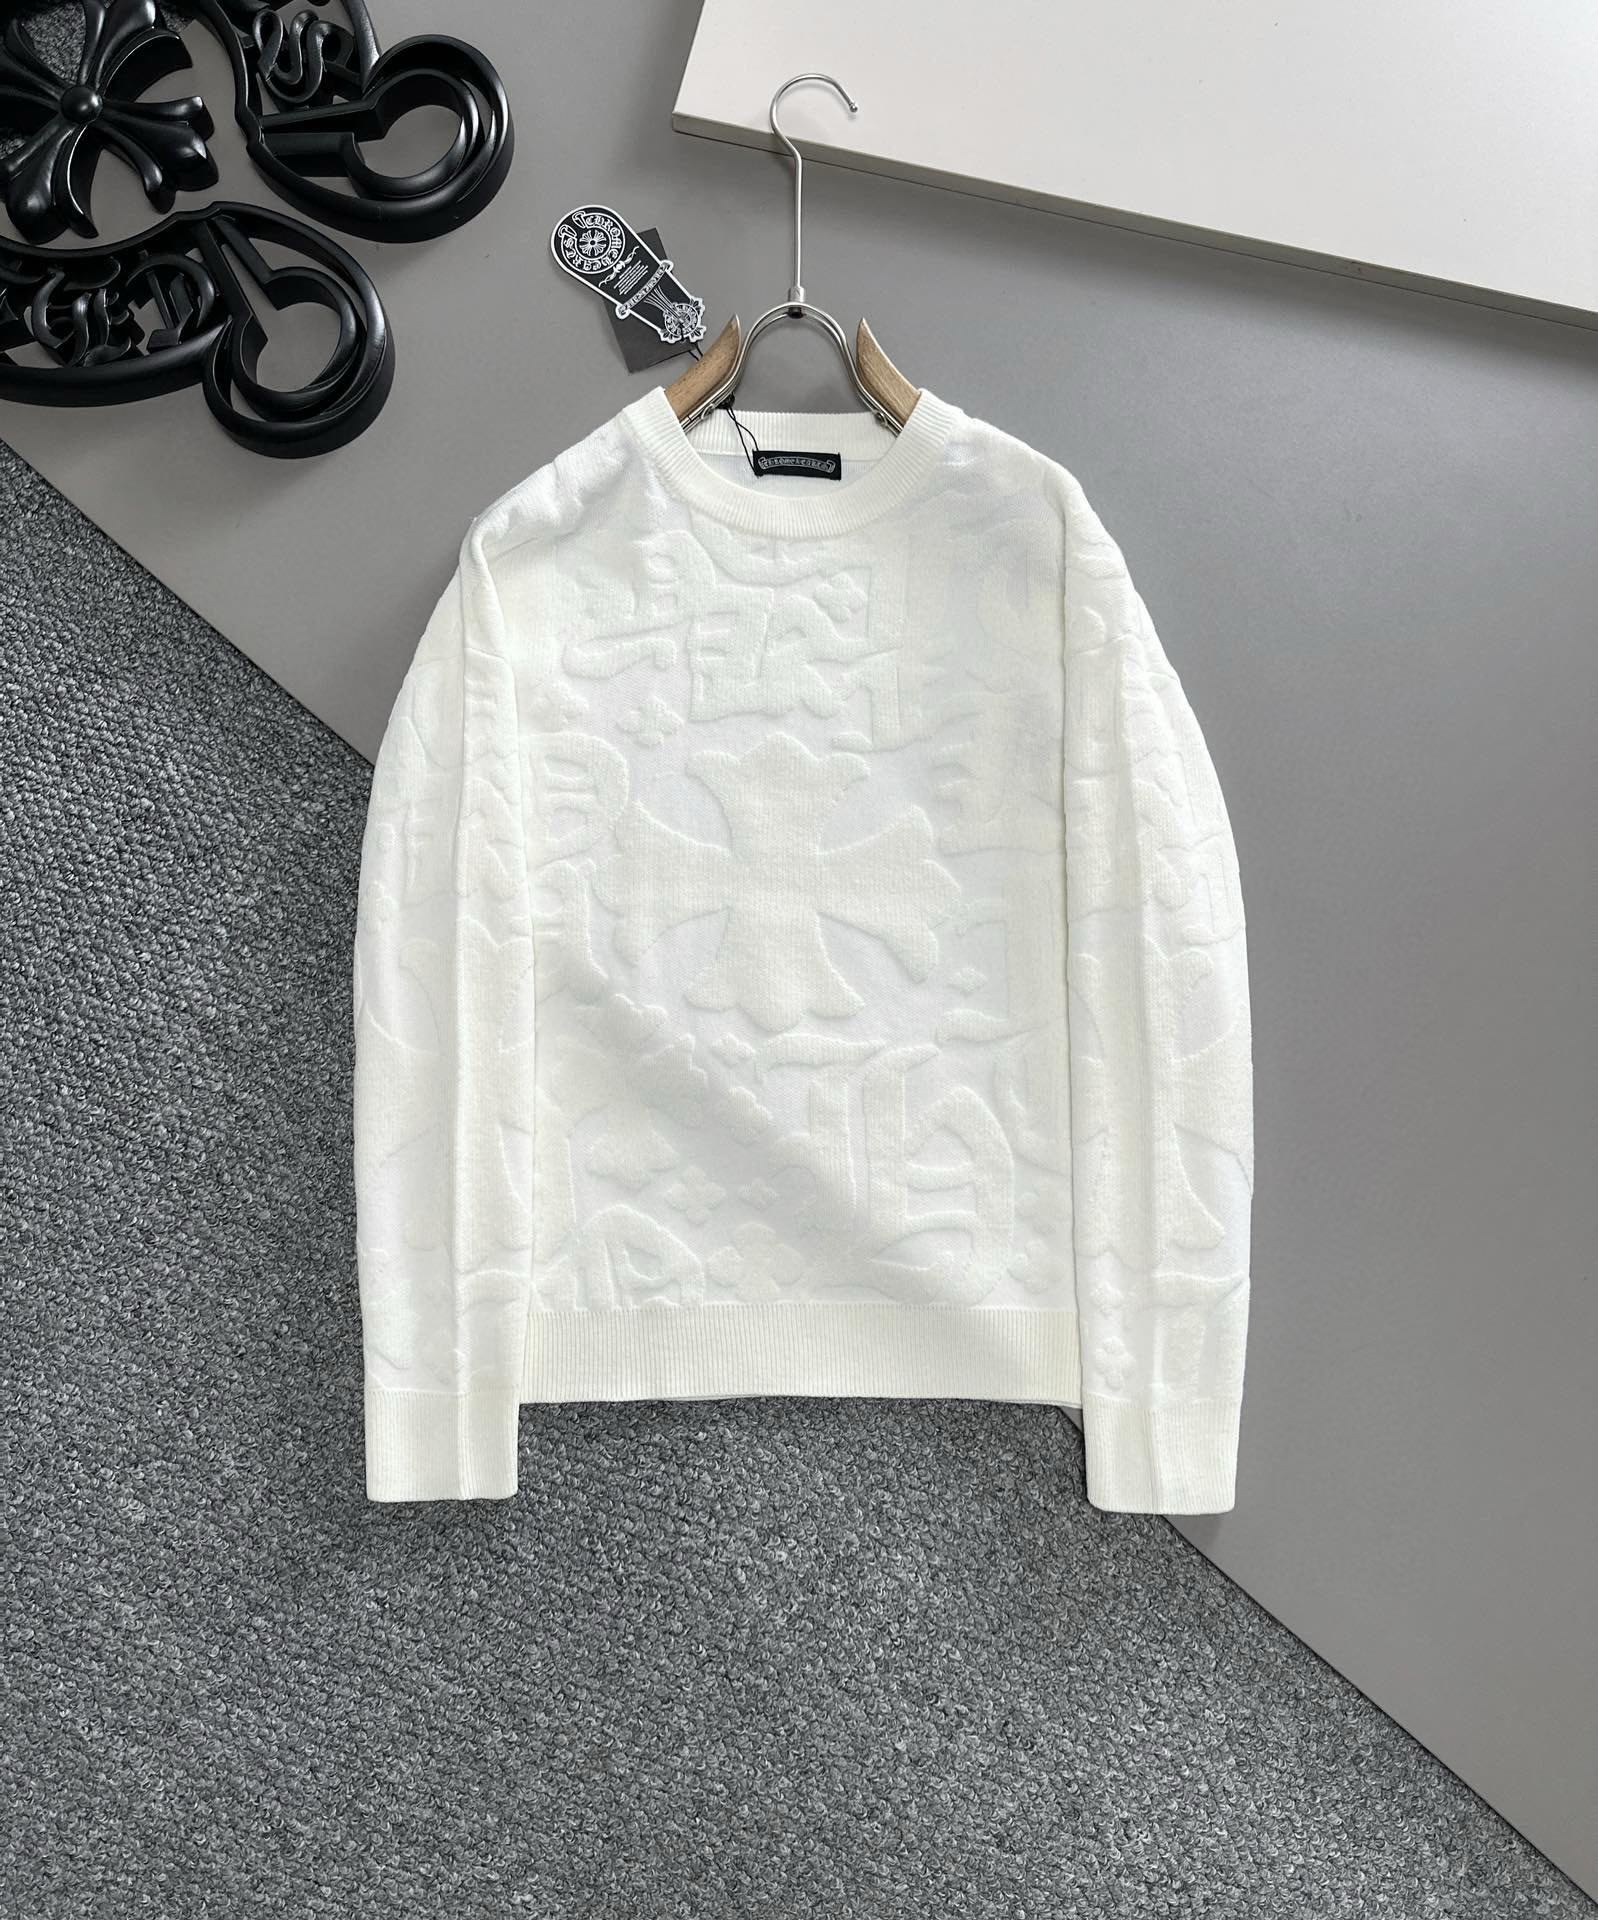 Replica Chrome Hearts Clothing Sweatshirts Shop the Best High Quality Cashmere Spandex Wool Fall/Winter Collection